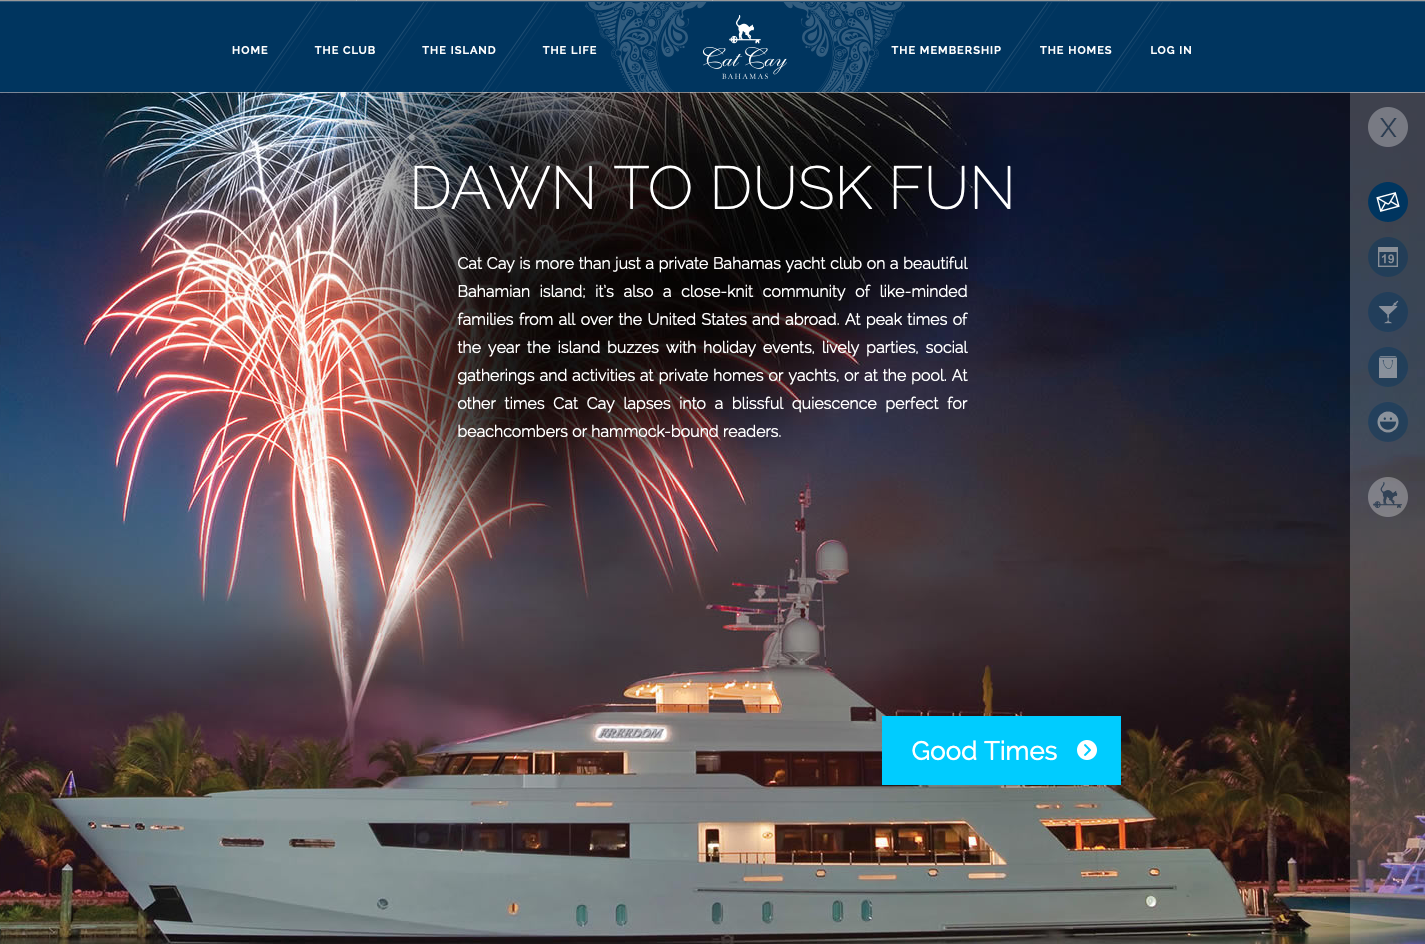 A picture of a yacht on the island with fireworks in the background serves as the backdrop of a tour focused on fun.